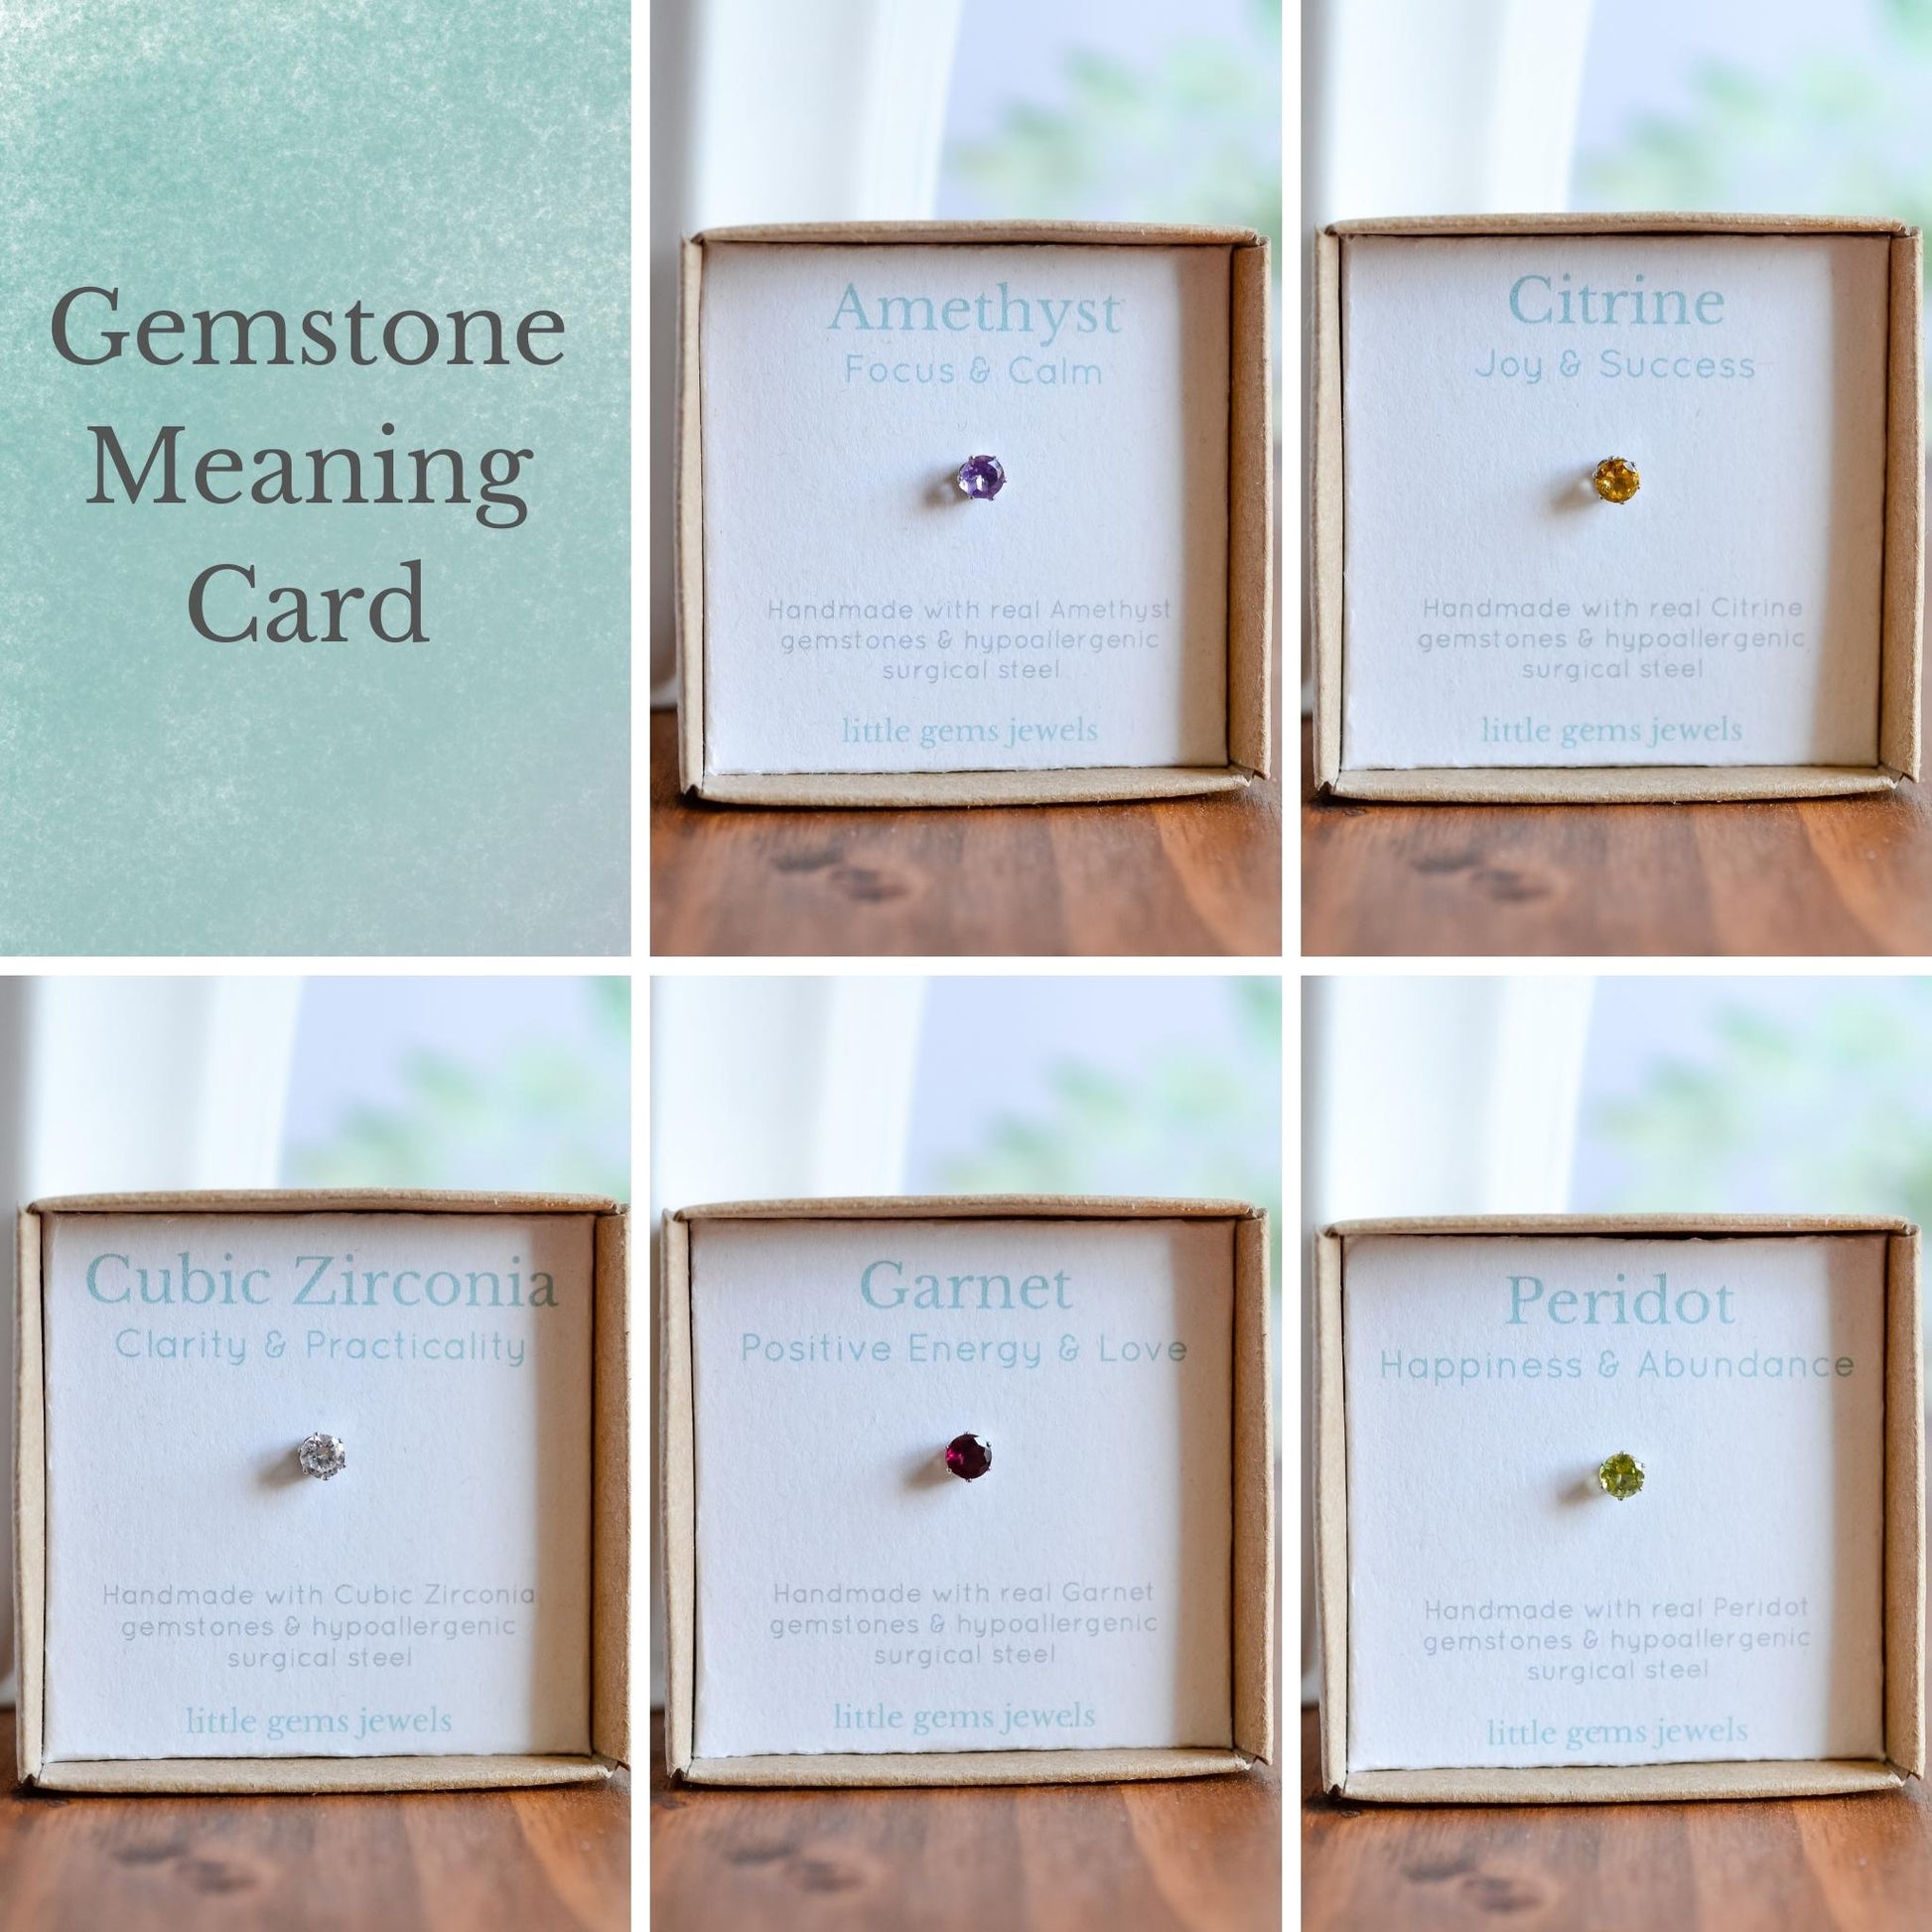 Gemstone meaning card - each stud earring in its gift box with the meaning of that gemstone